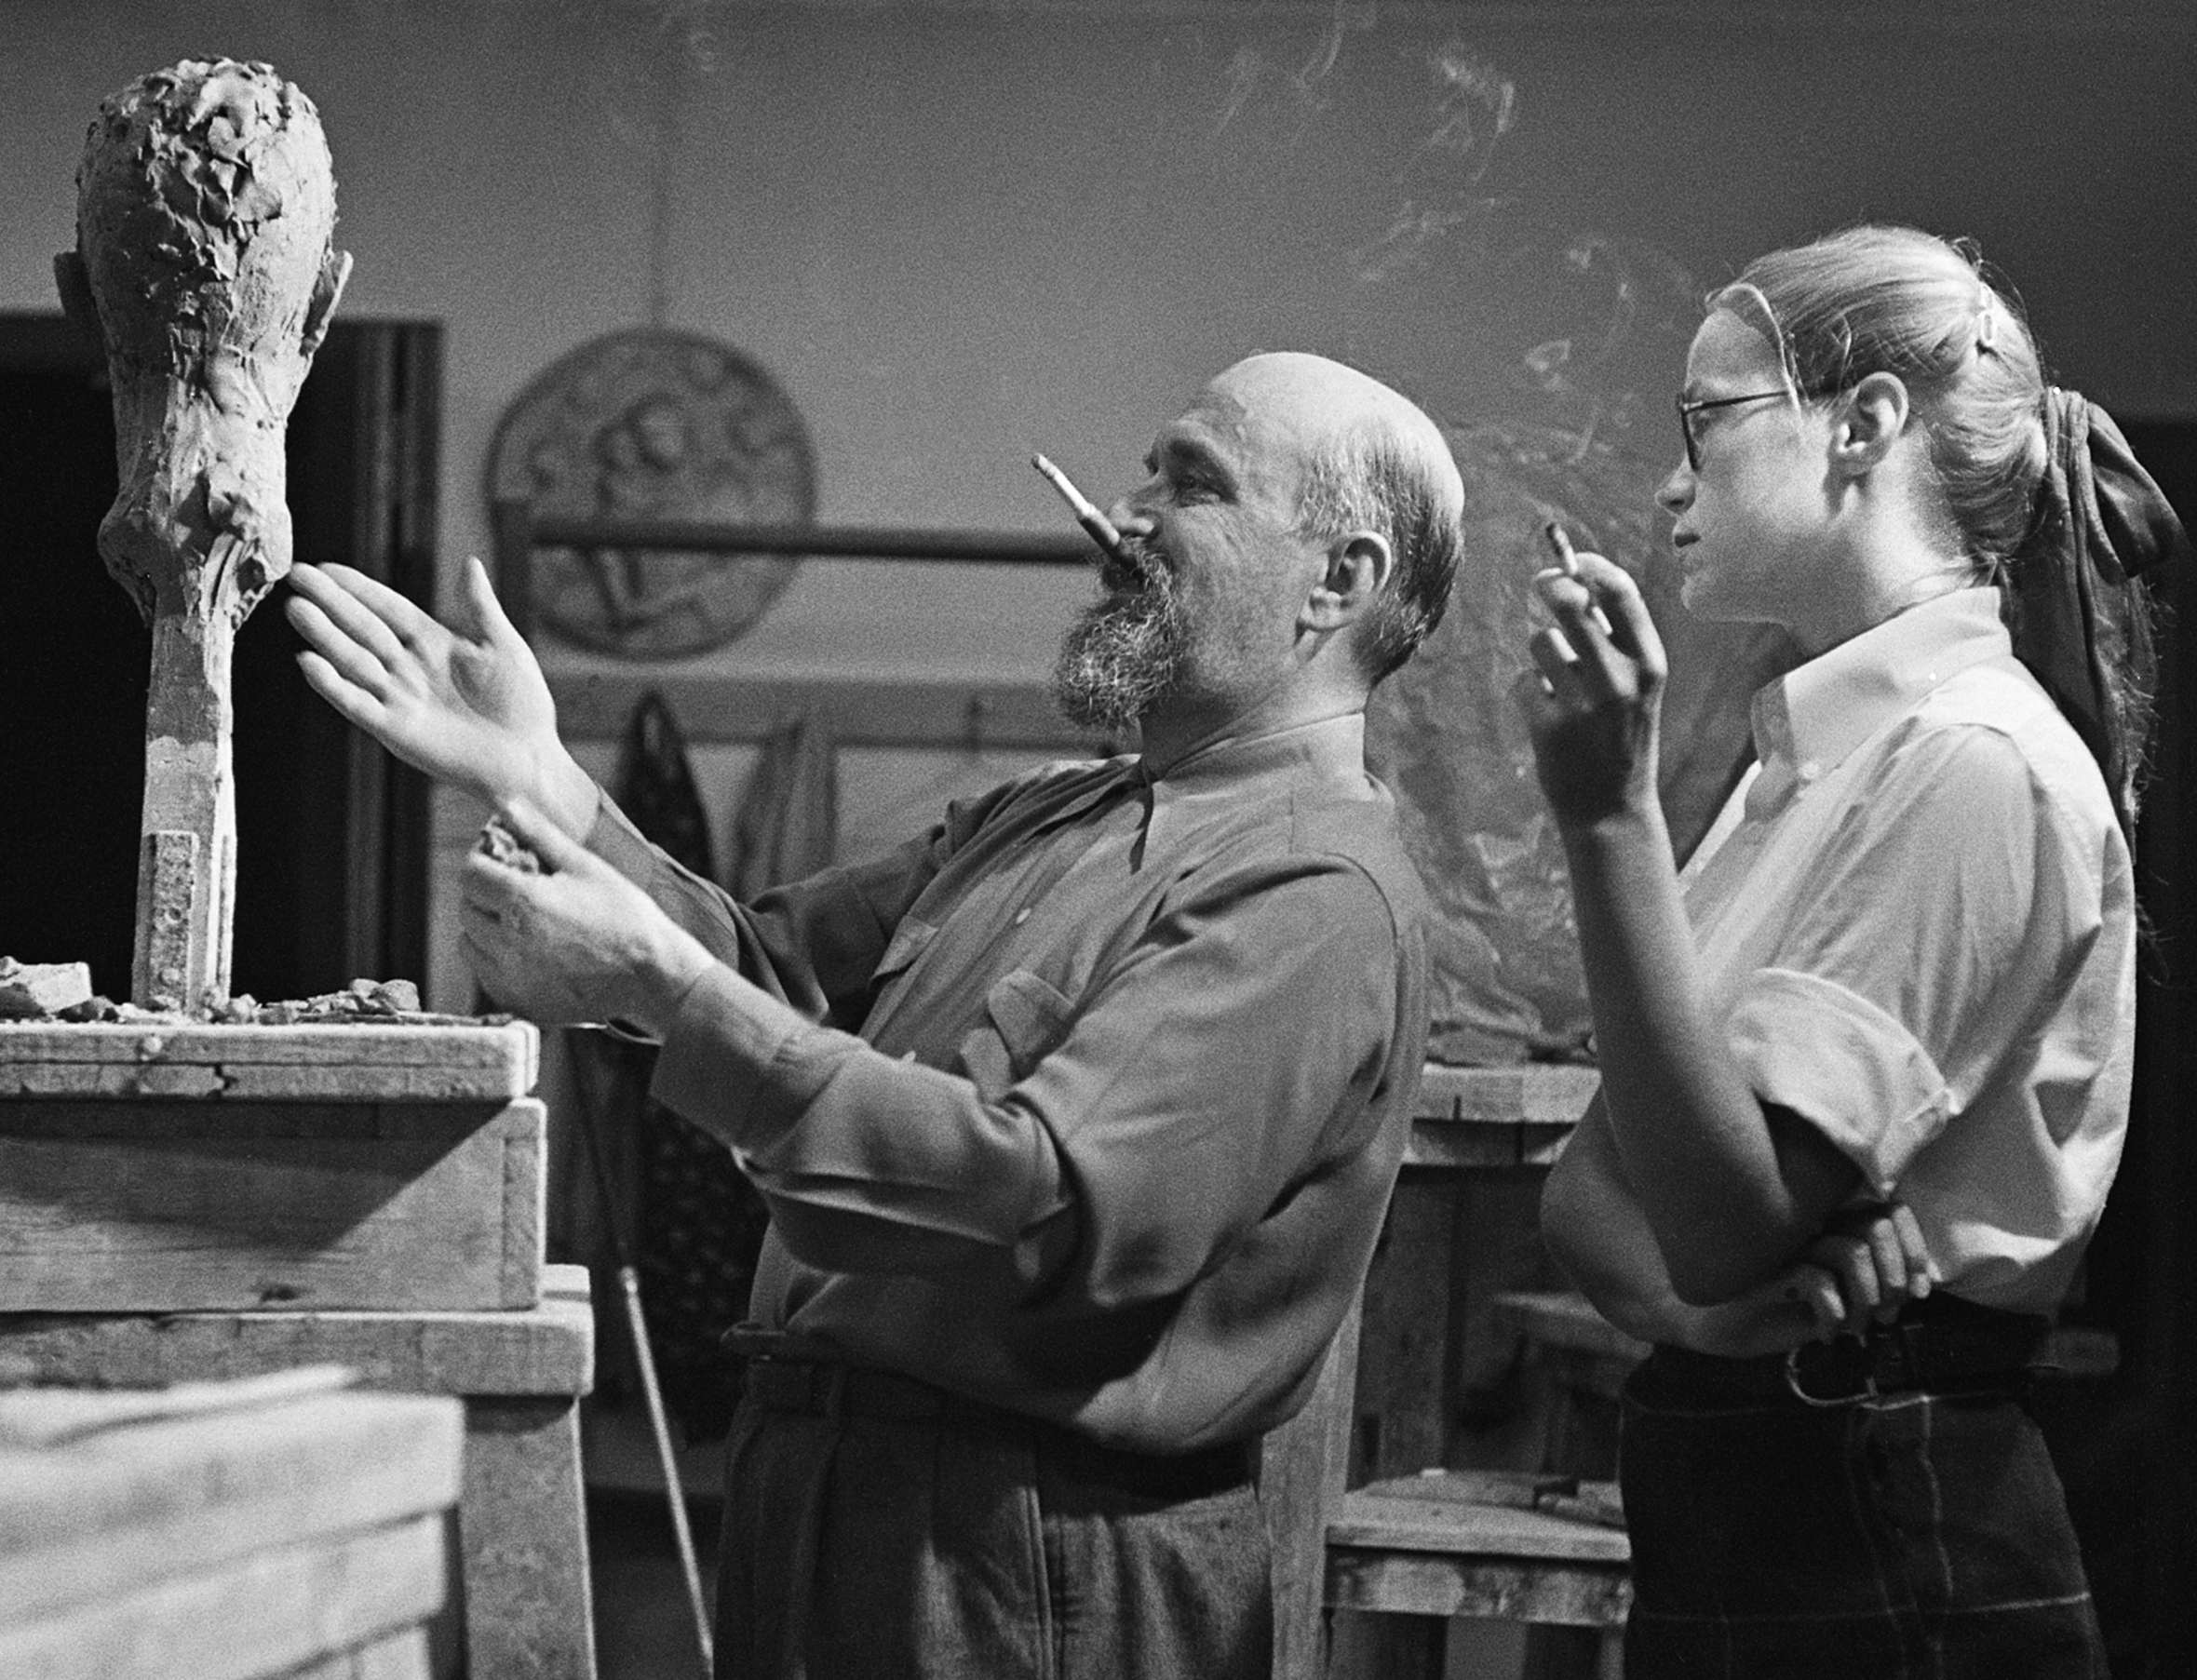 An older man and younger woman stand in an art studio or classroom discussing a clay bust on a pedestal. Both people are smoking. The man has a cigarette in his mouth as he gestures to the bust with both hands.